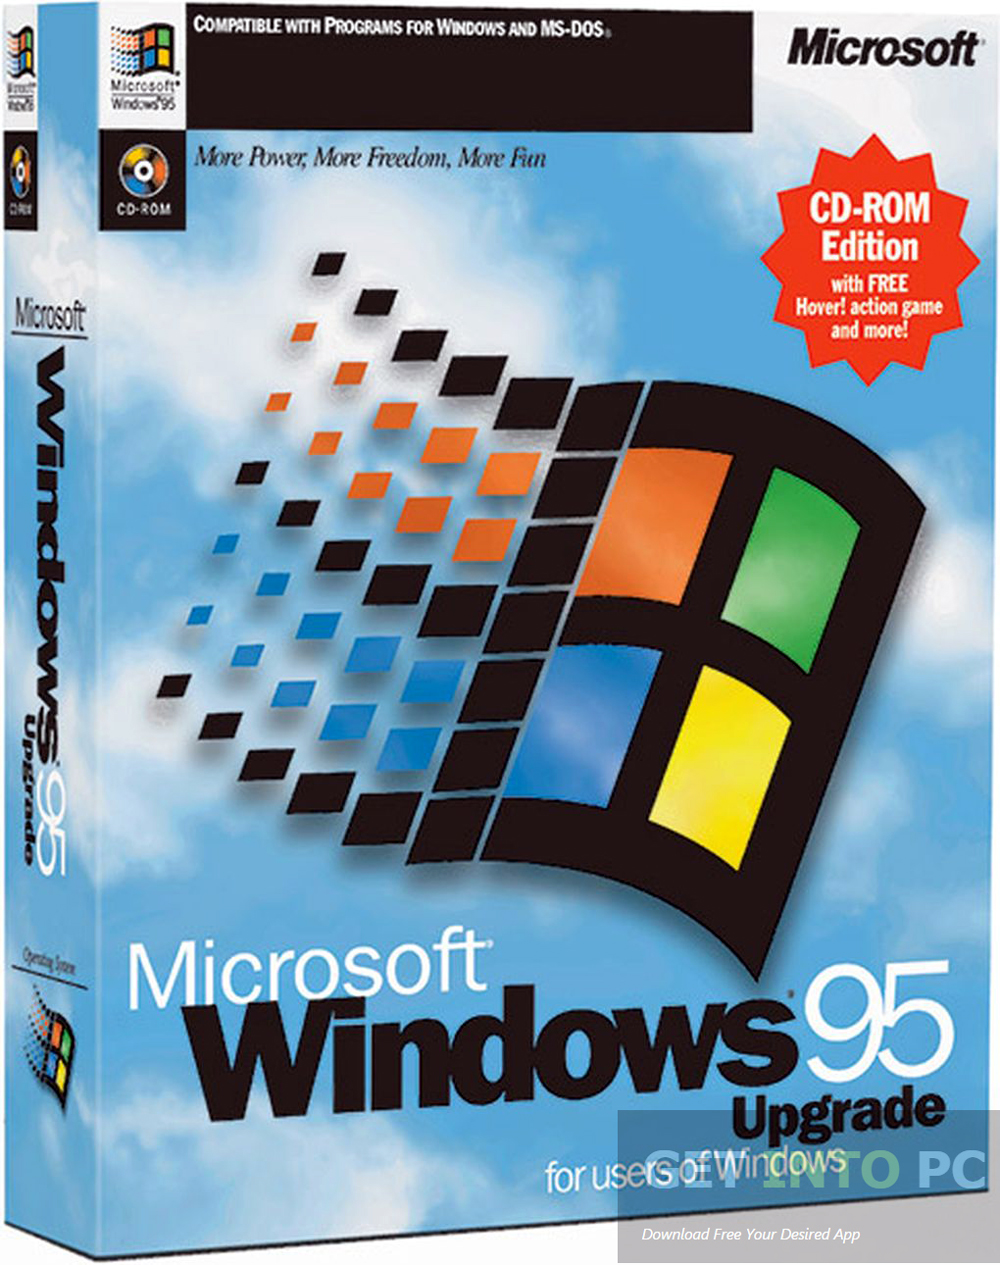 How to install windows 95